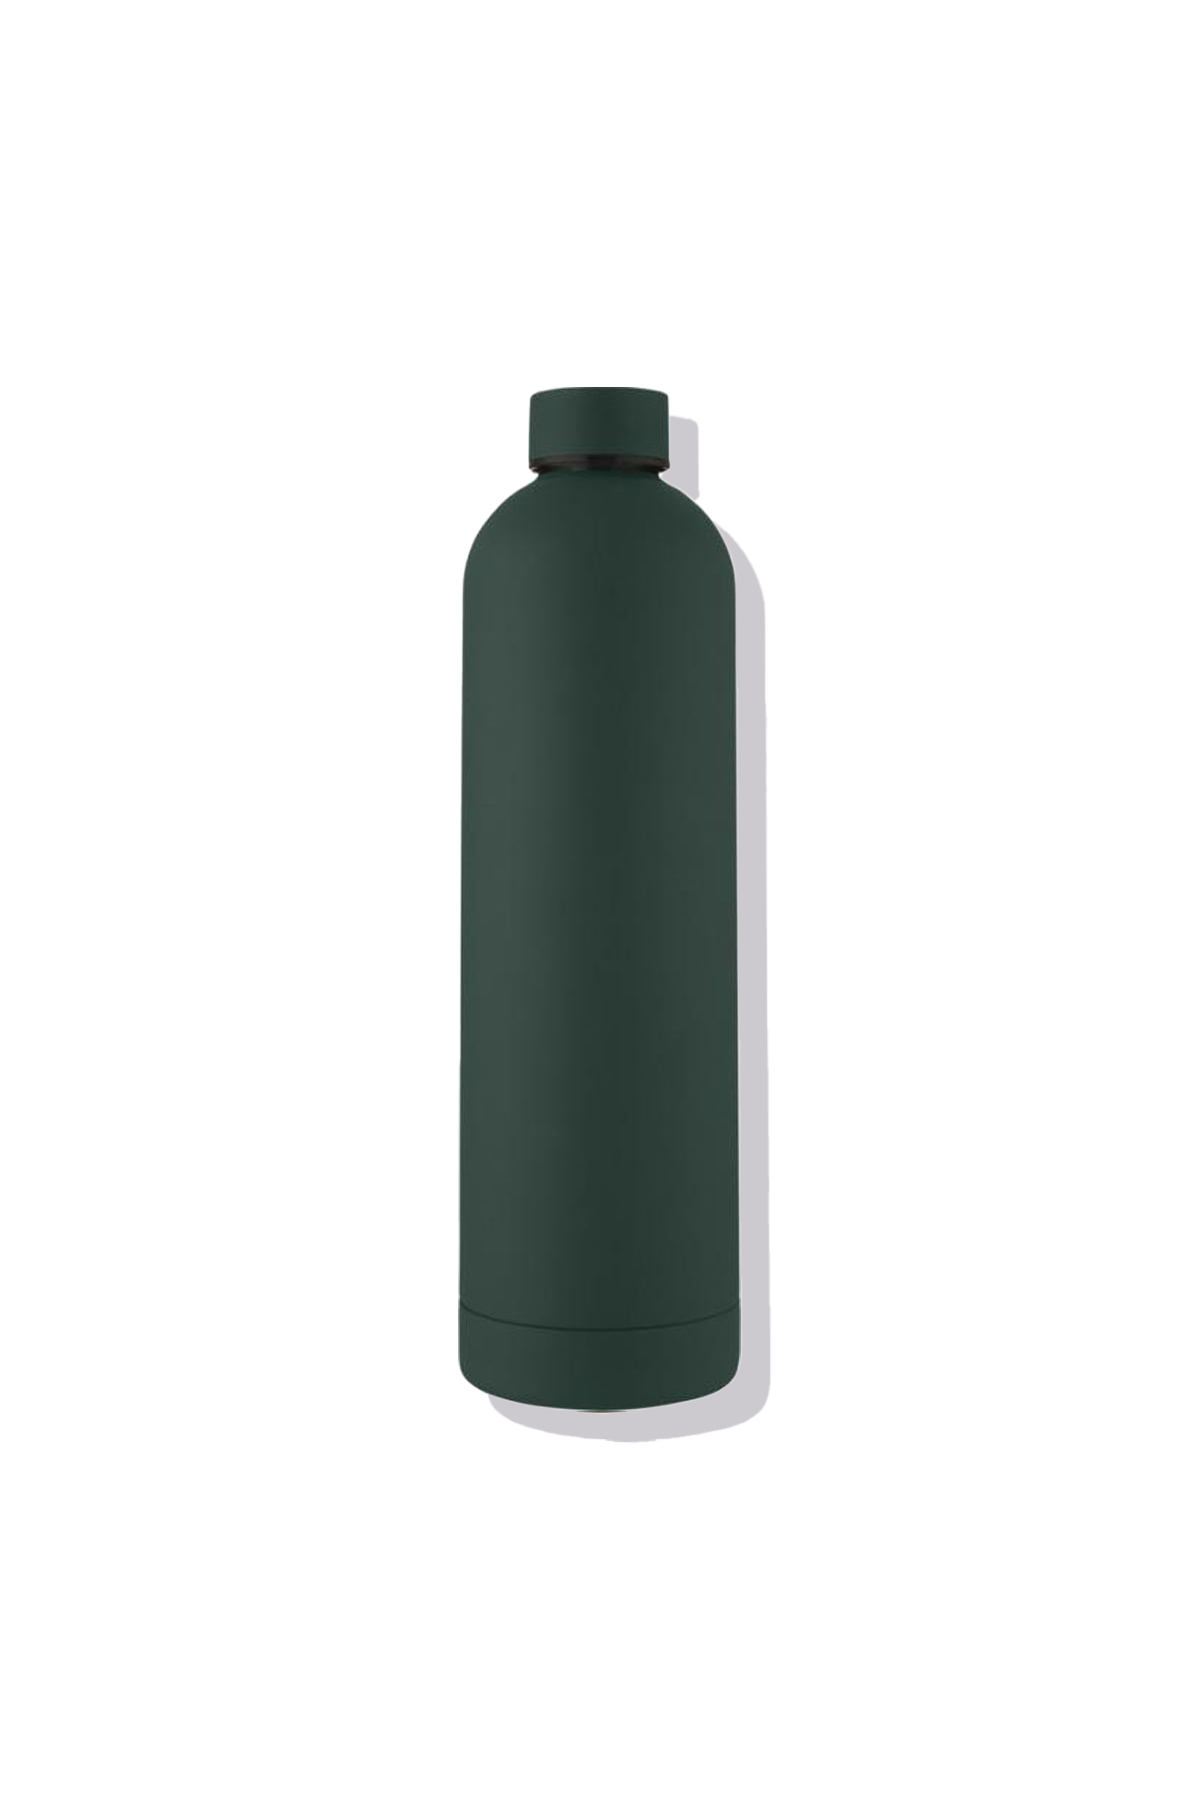 Avenue Spring 1L Insulated Bottle